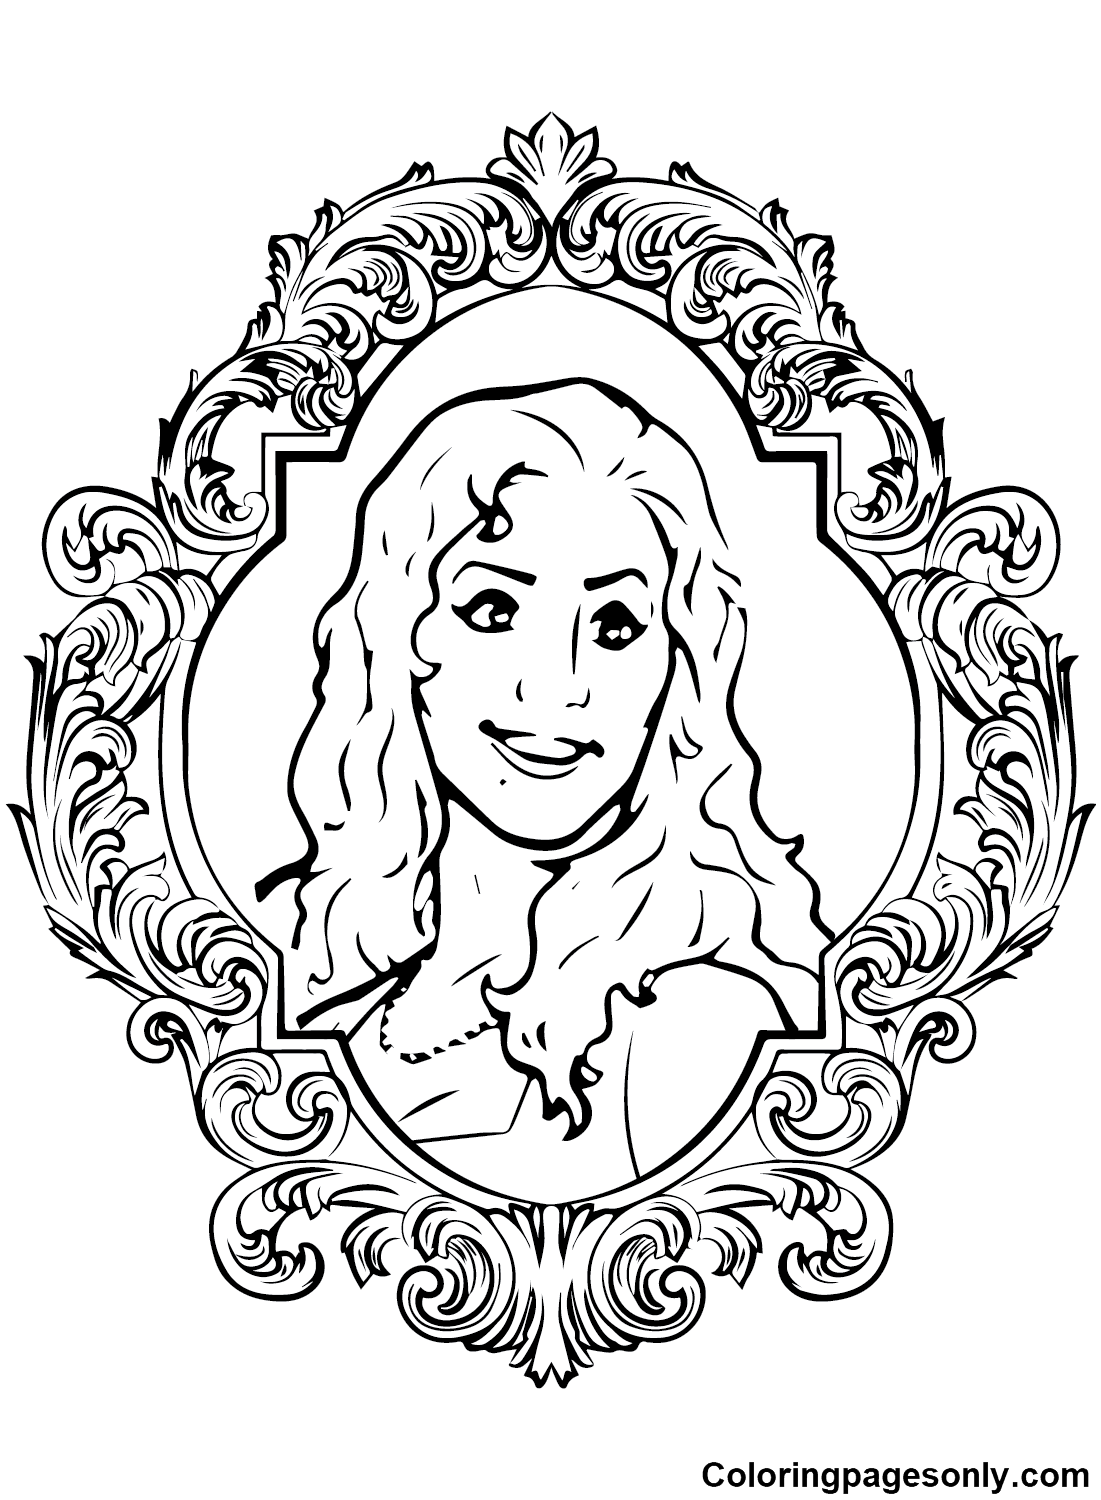 Hocus Pocus Pictures Coloring Page